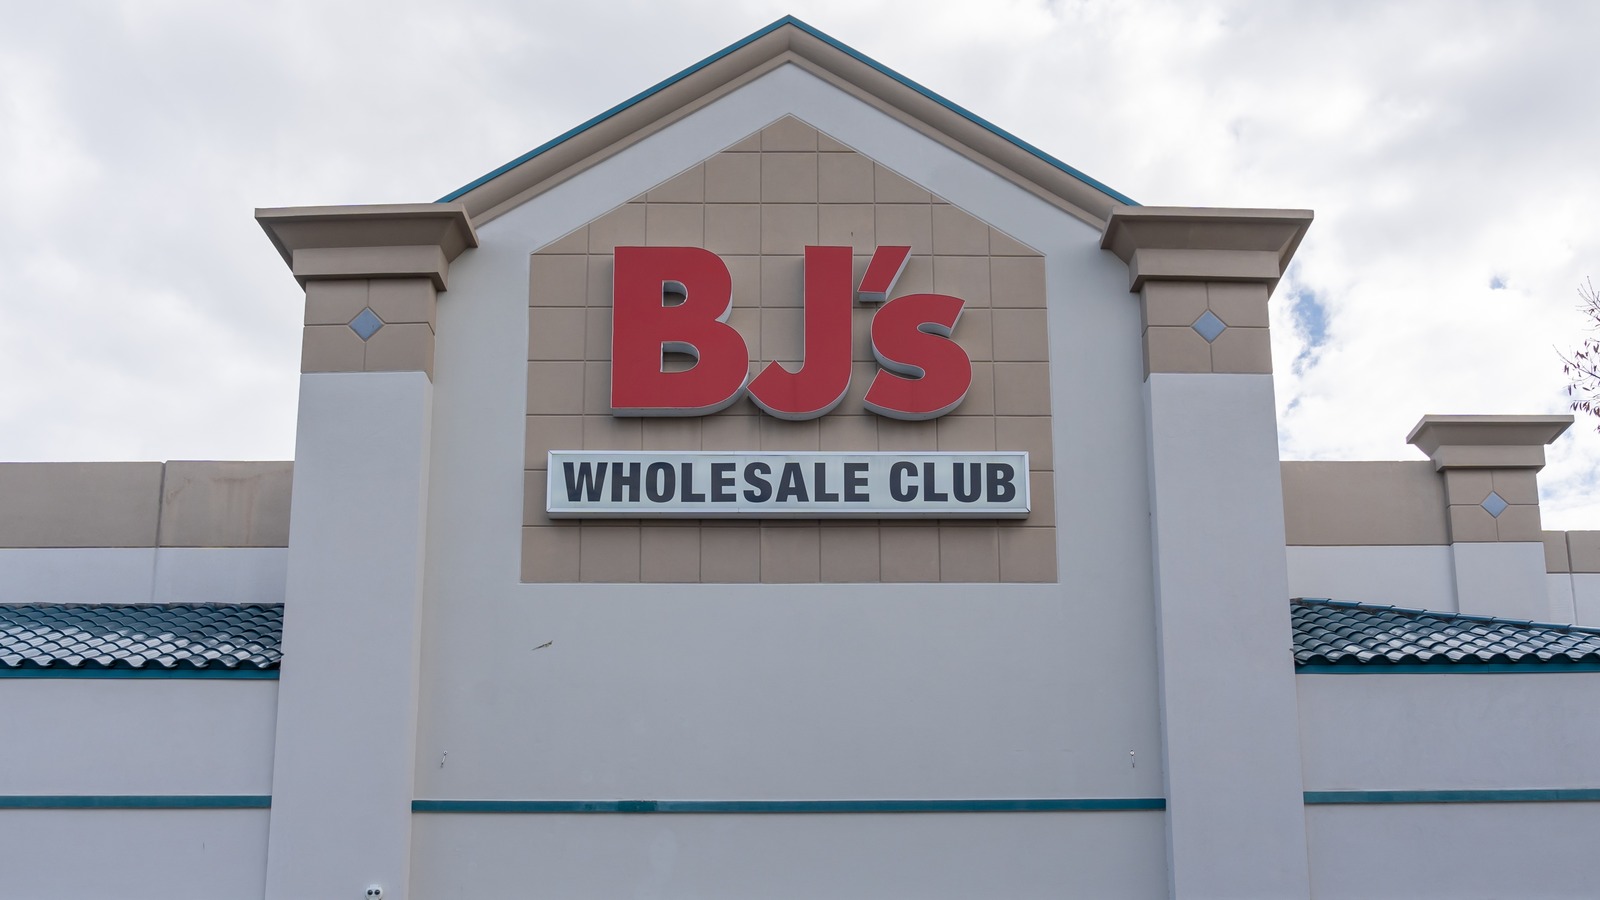 3 Things to Know About BJ's Wholesale Club